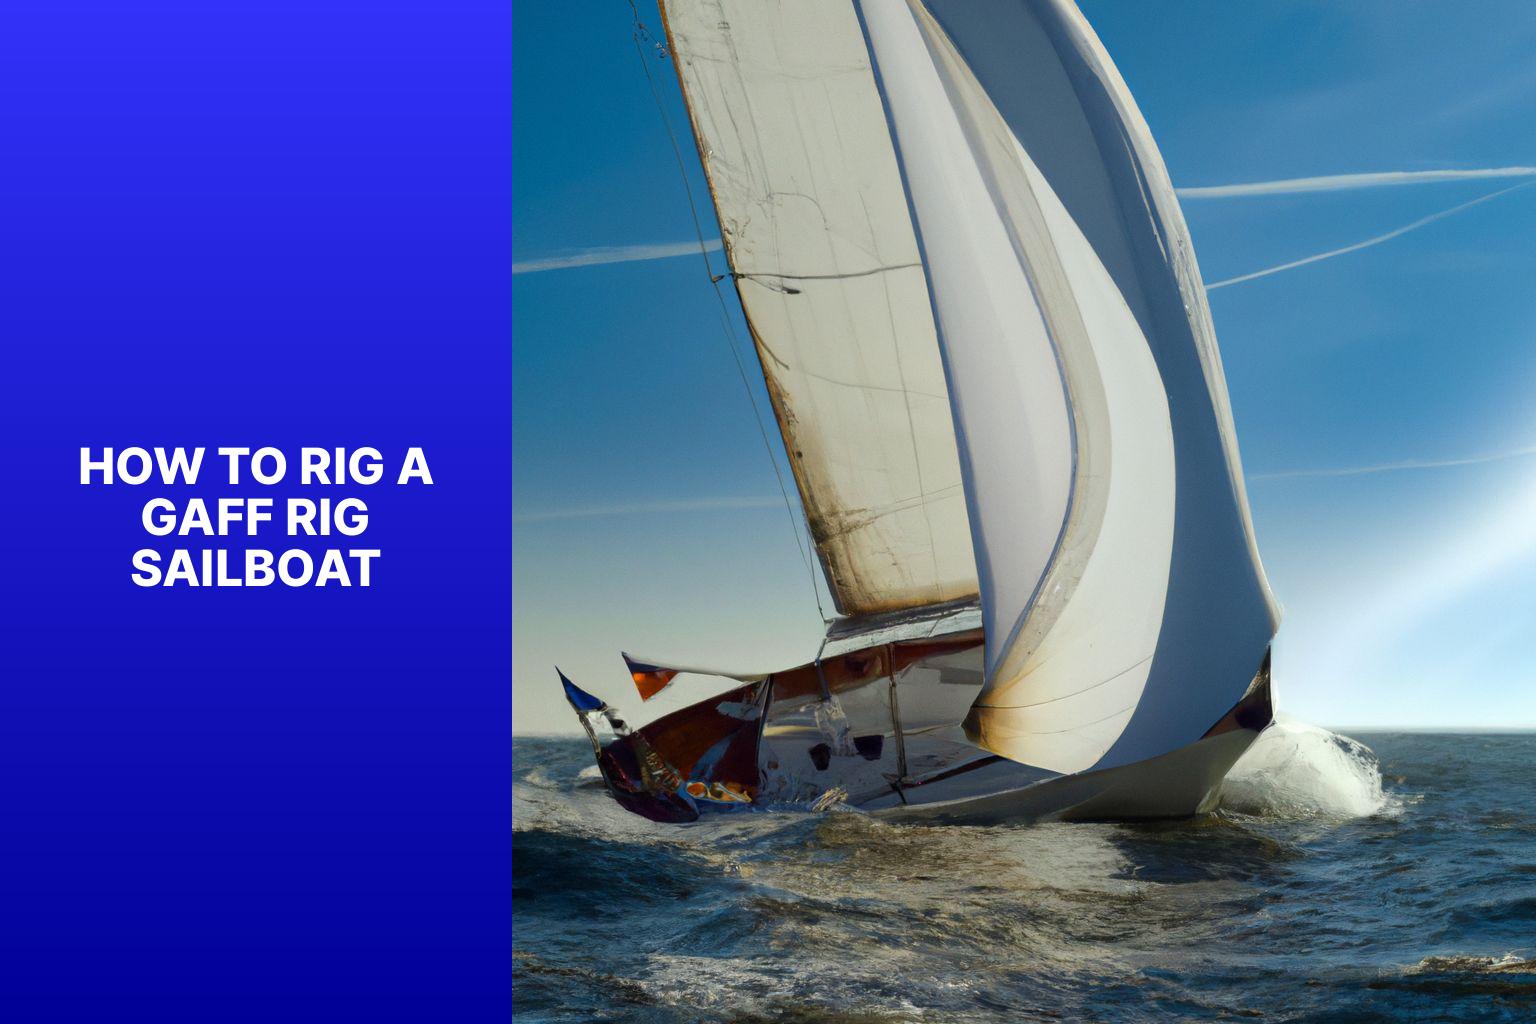 Learn How To Rig a Gaff Rig Sailboat – A Step-by-Step Guide